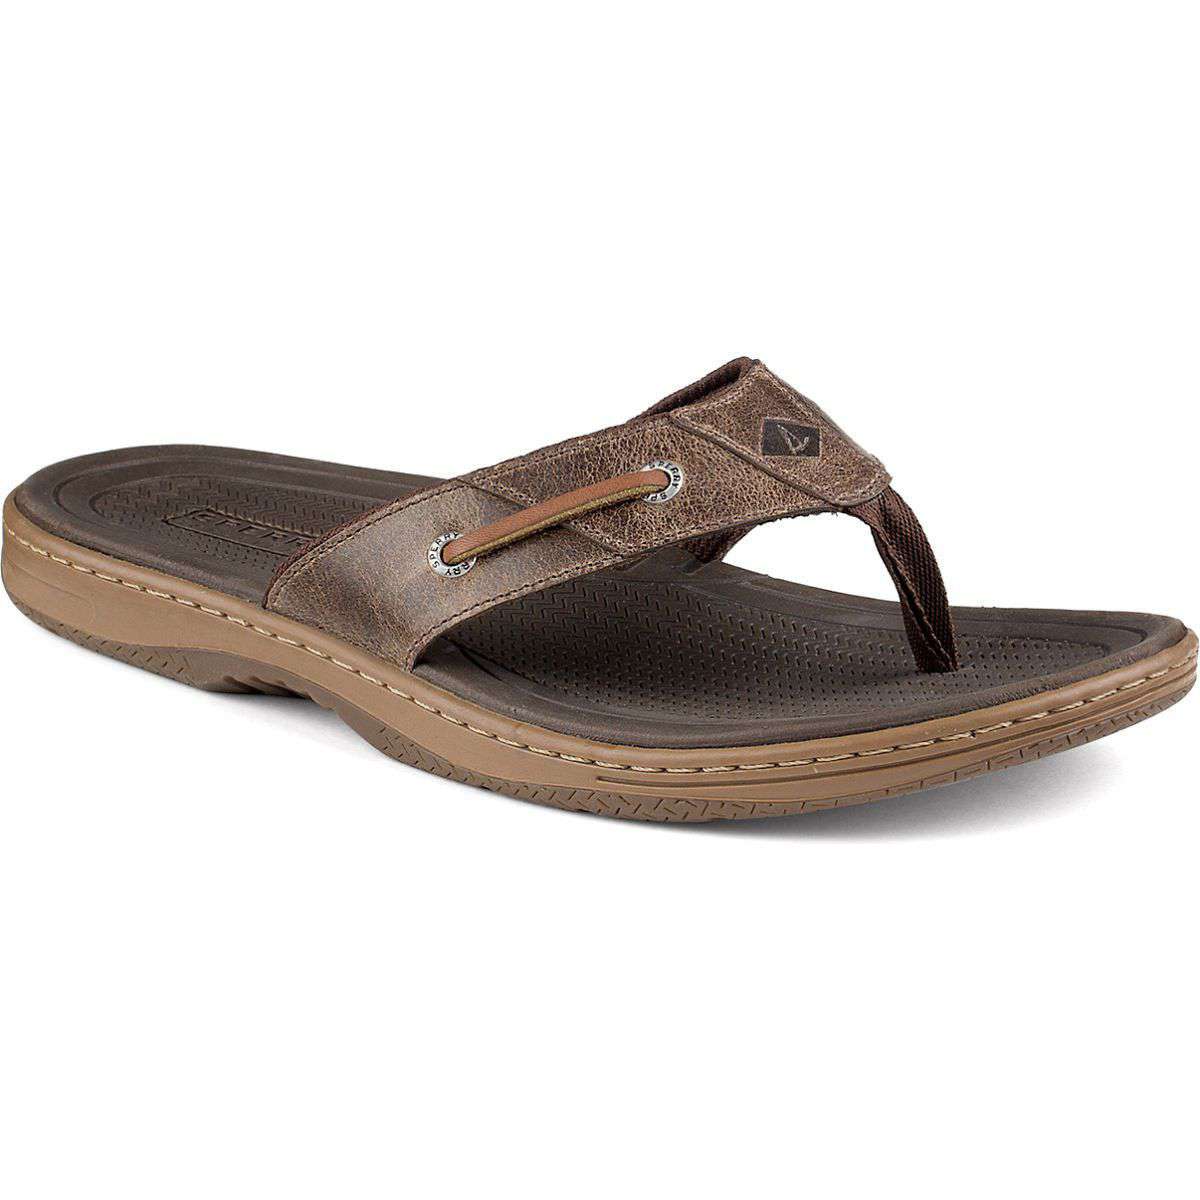 Men's Baitfish Thong Sandal in Brown by Sperry - Country Club Prep